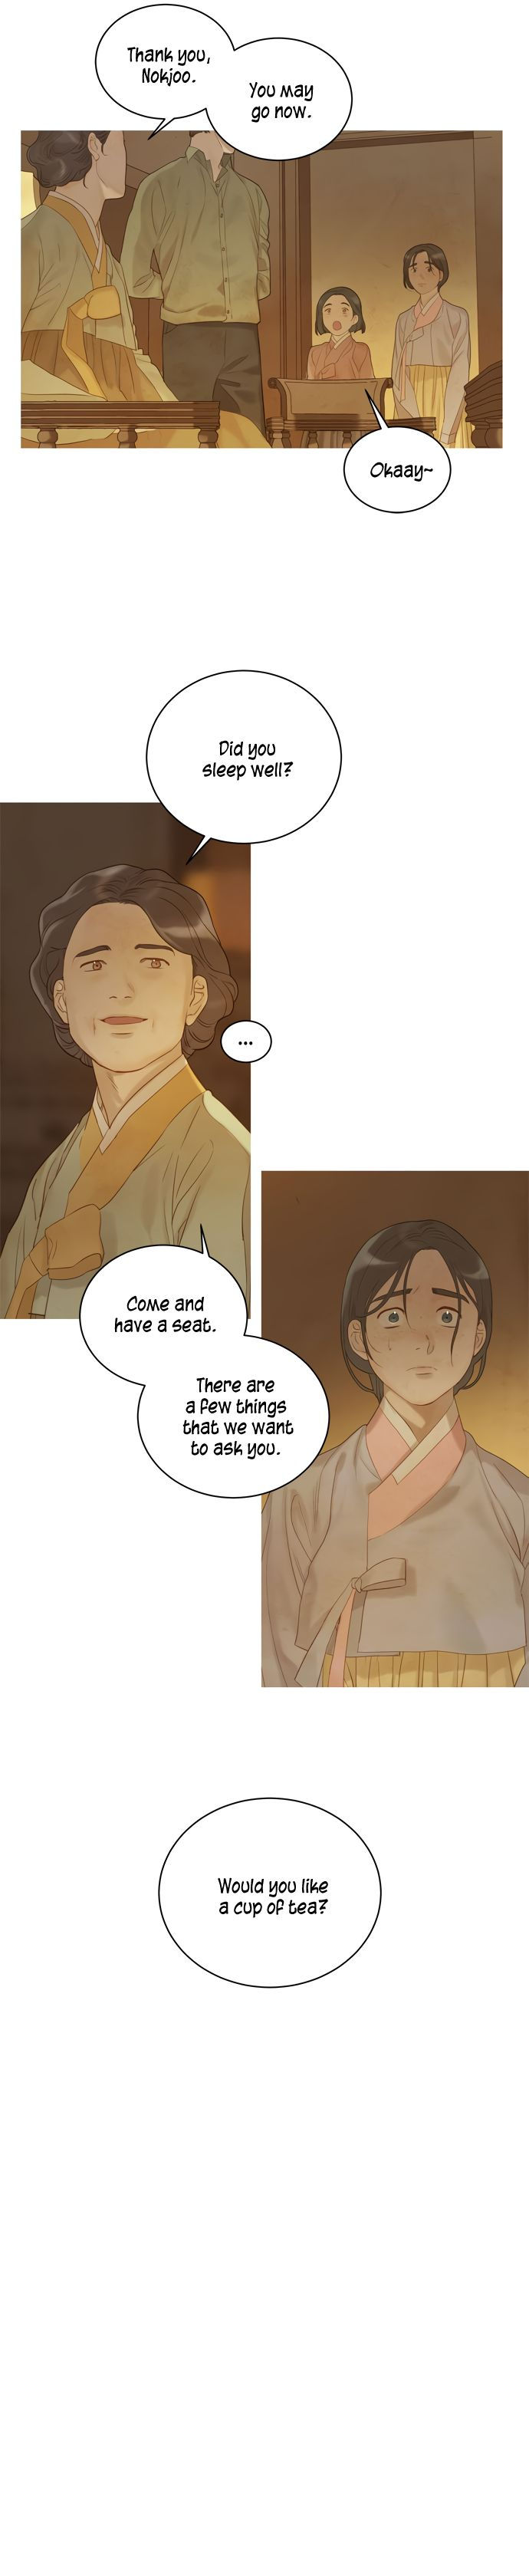 Gorae Byul - The Gyeongseong Mermaid - Chapter 20 Page 15